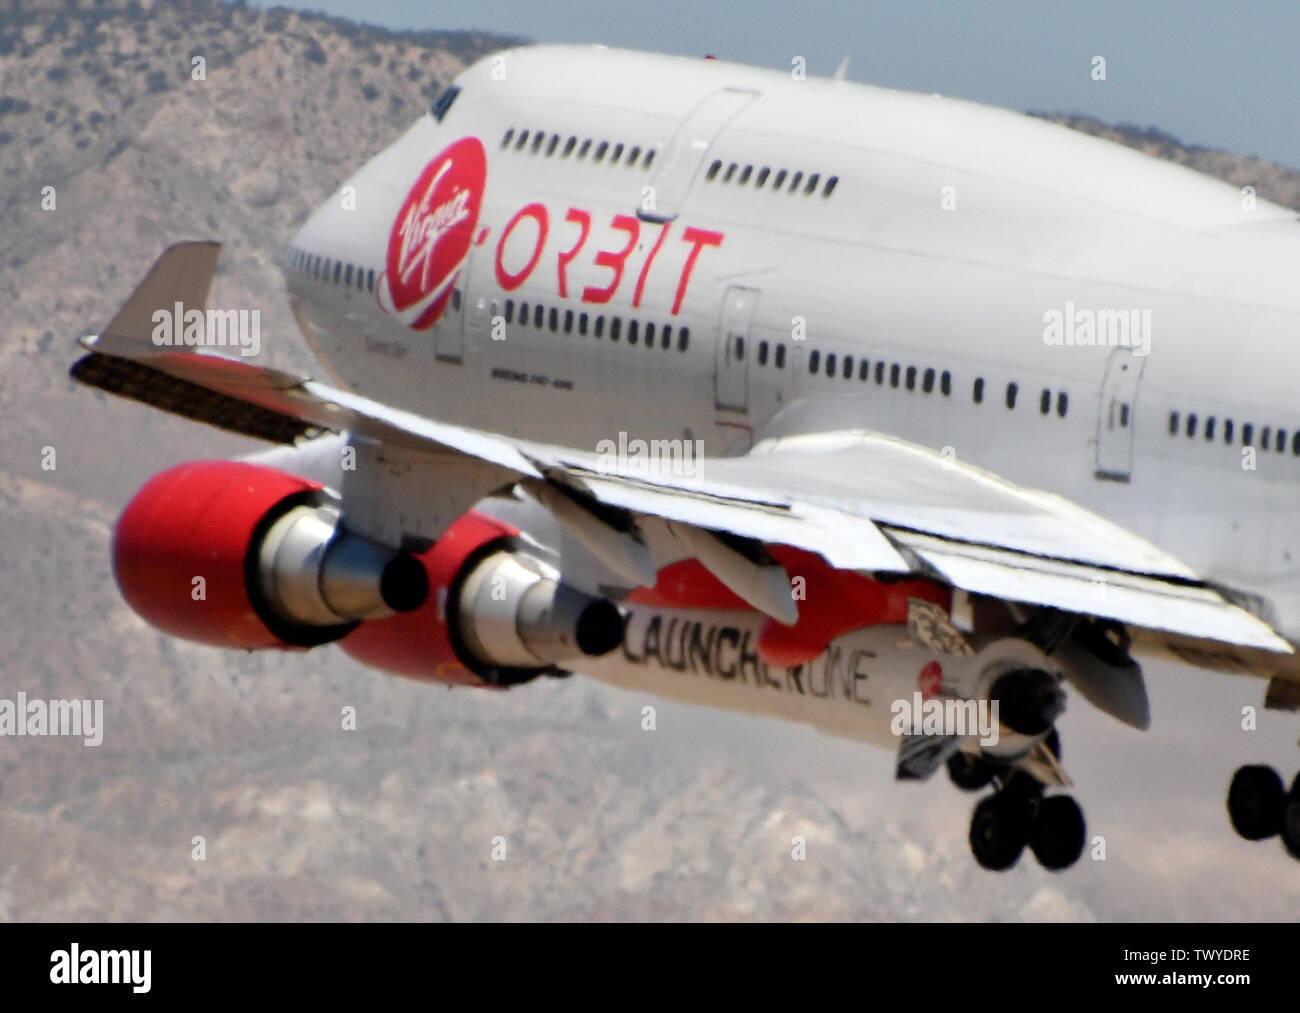 Mojave, California, USA. 23rd June, 2019. Virgin Orbit 747 Cosmic Girl comes in for landing after 4hr test run Sunday morning from Mojave airport California, June 23, 2019. Under it's left wing is the LauncerOne rocket that getting ready for it's first test drop this year. The 747 did a series of test of Zoom Climb Maneuvers off the coast of SoCal and will be leading up to the 1st launch test. Photo by Gene Blevins/ZUMAPRESS Credit: Gene Blevins/ZUMA Wire/Alamy Live News Stock Photo